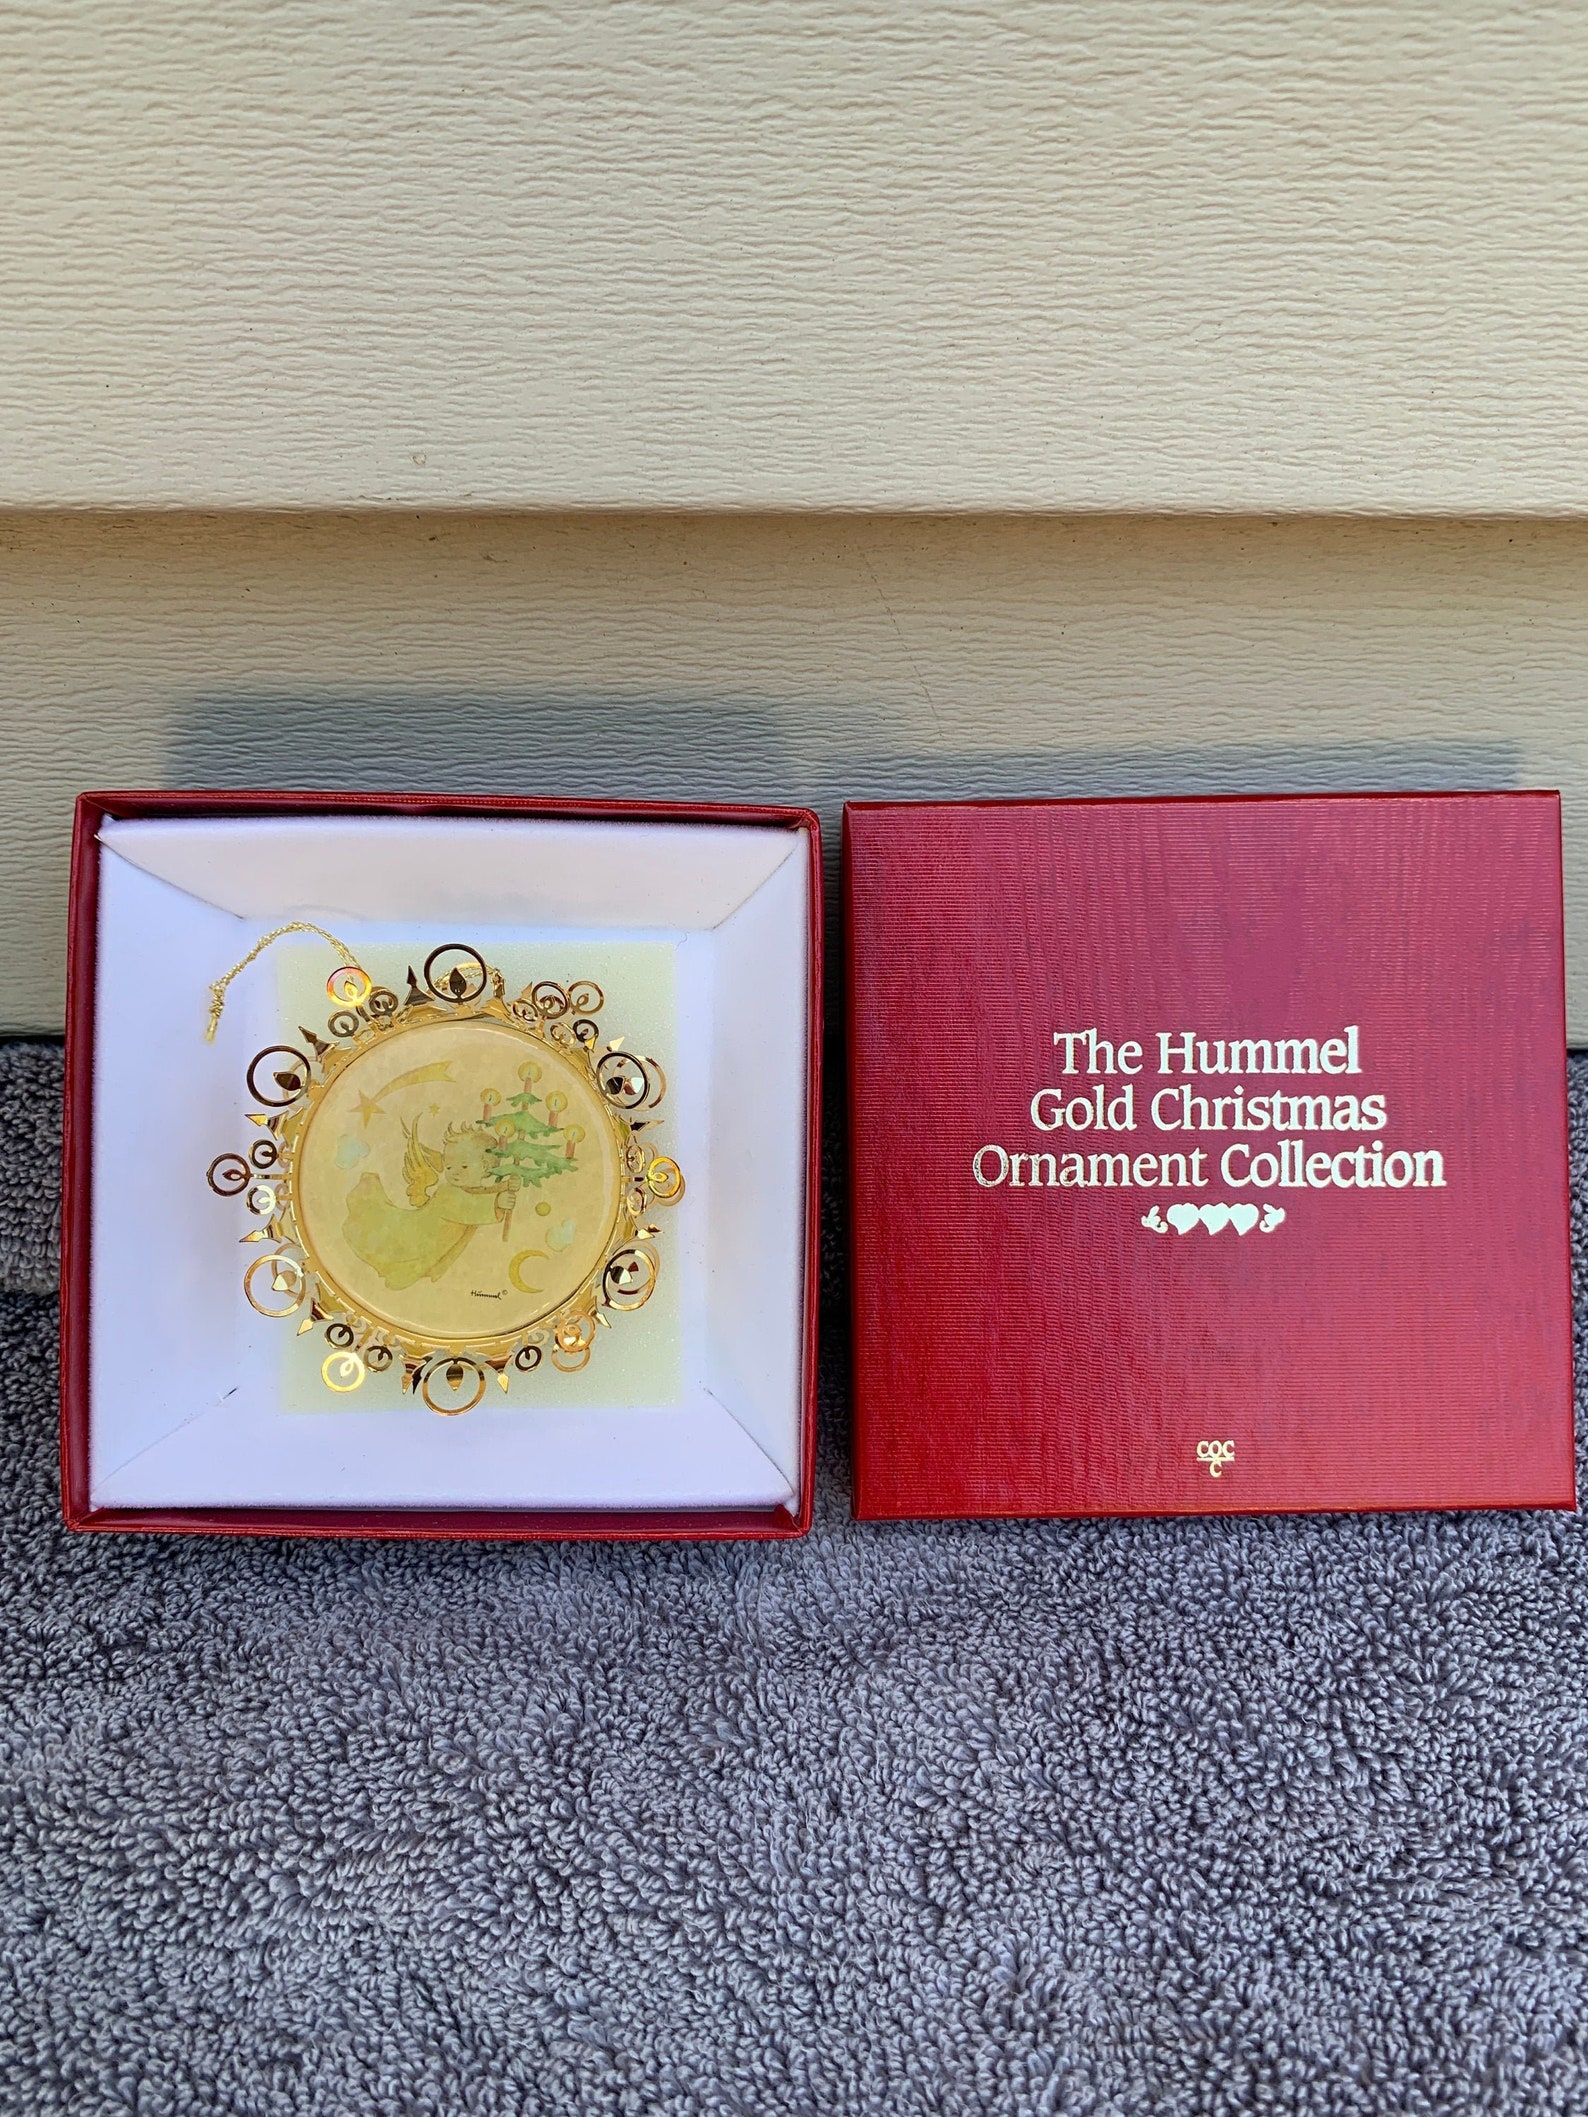 The Hummel Gold Christmas Ornament Collection 